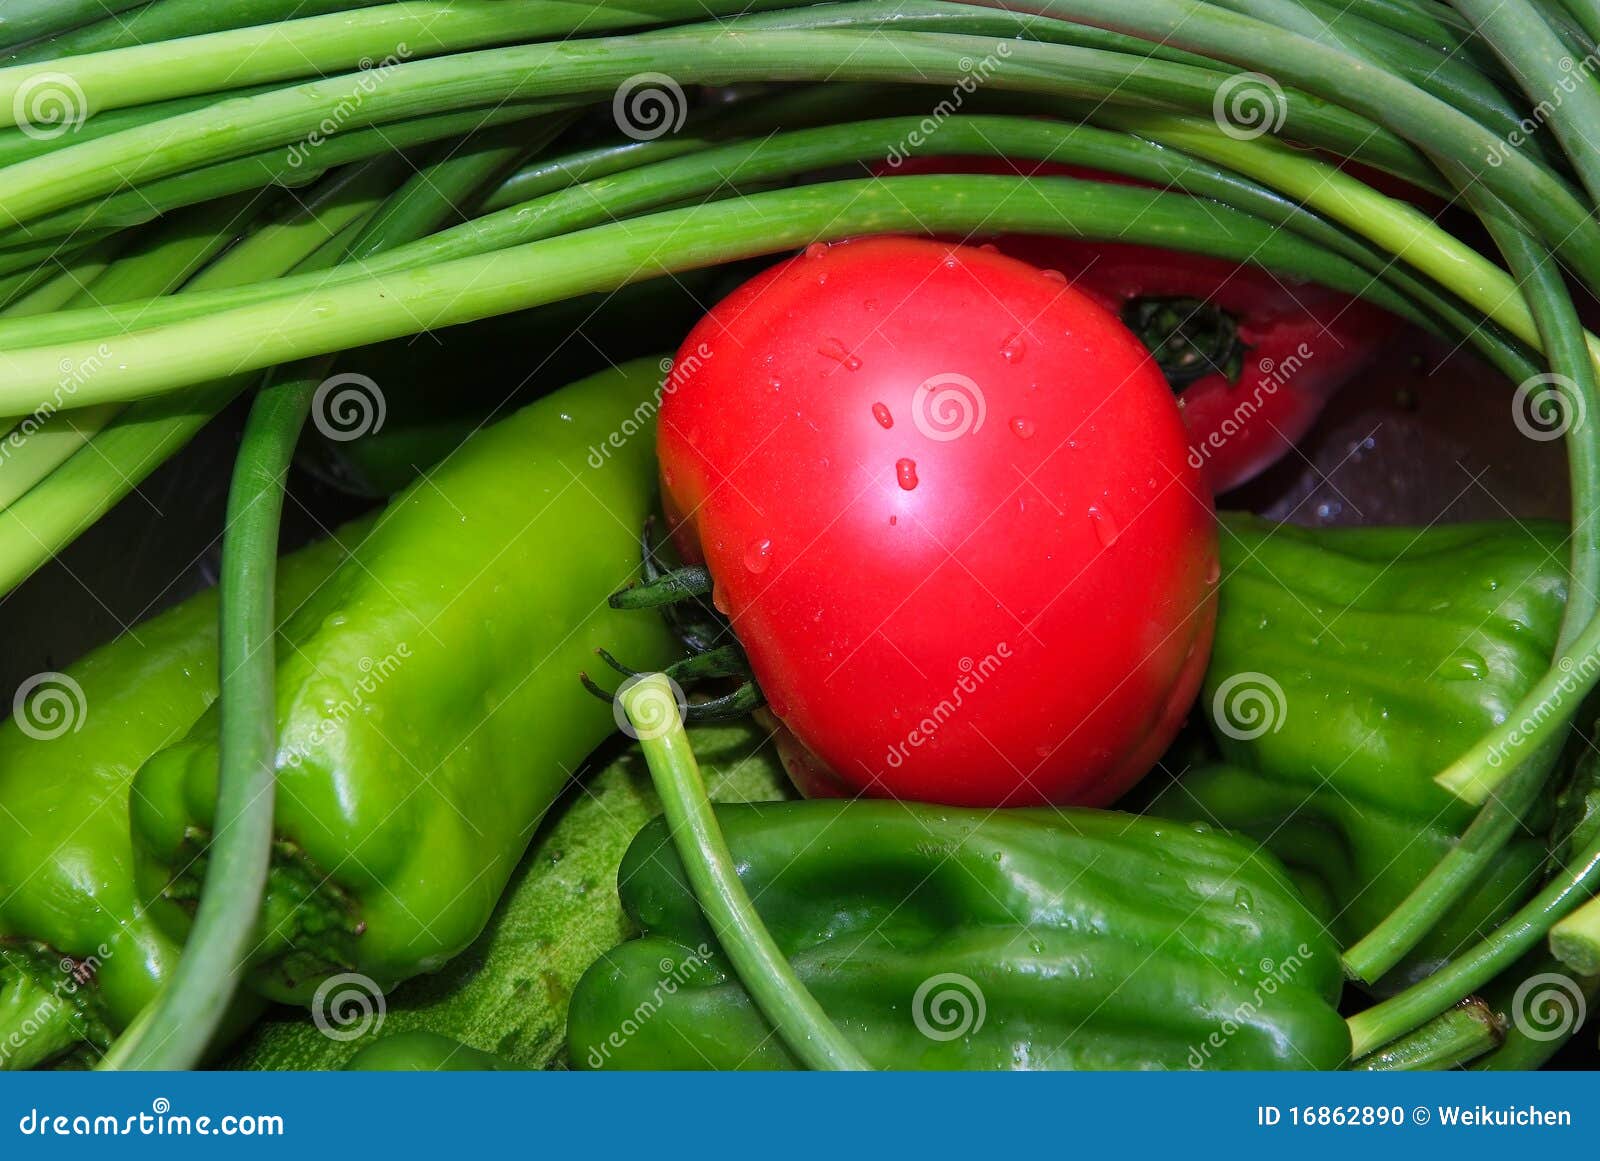 red and green vegetables